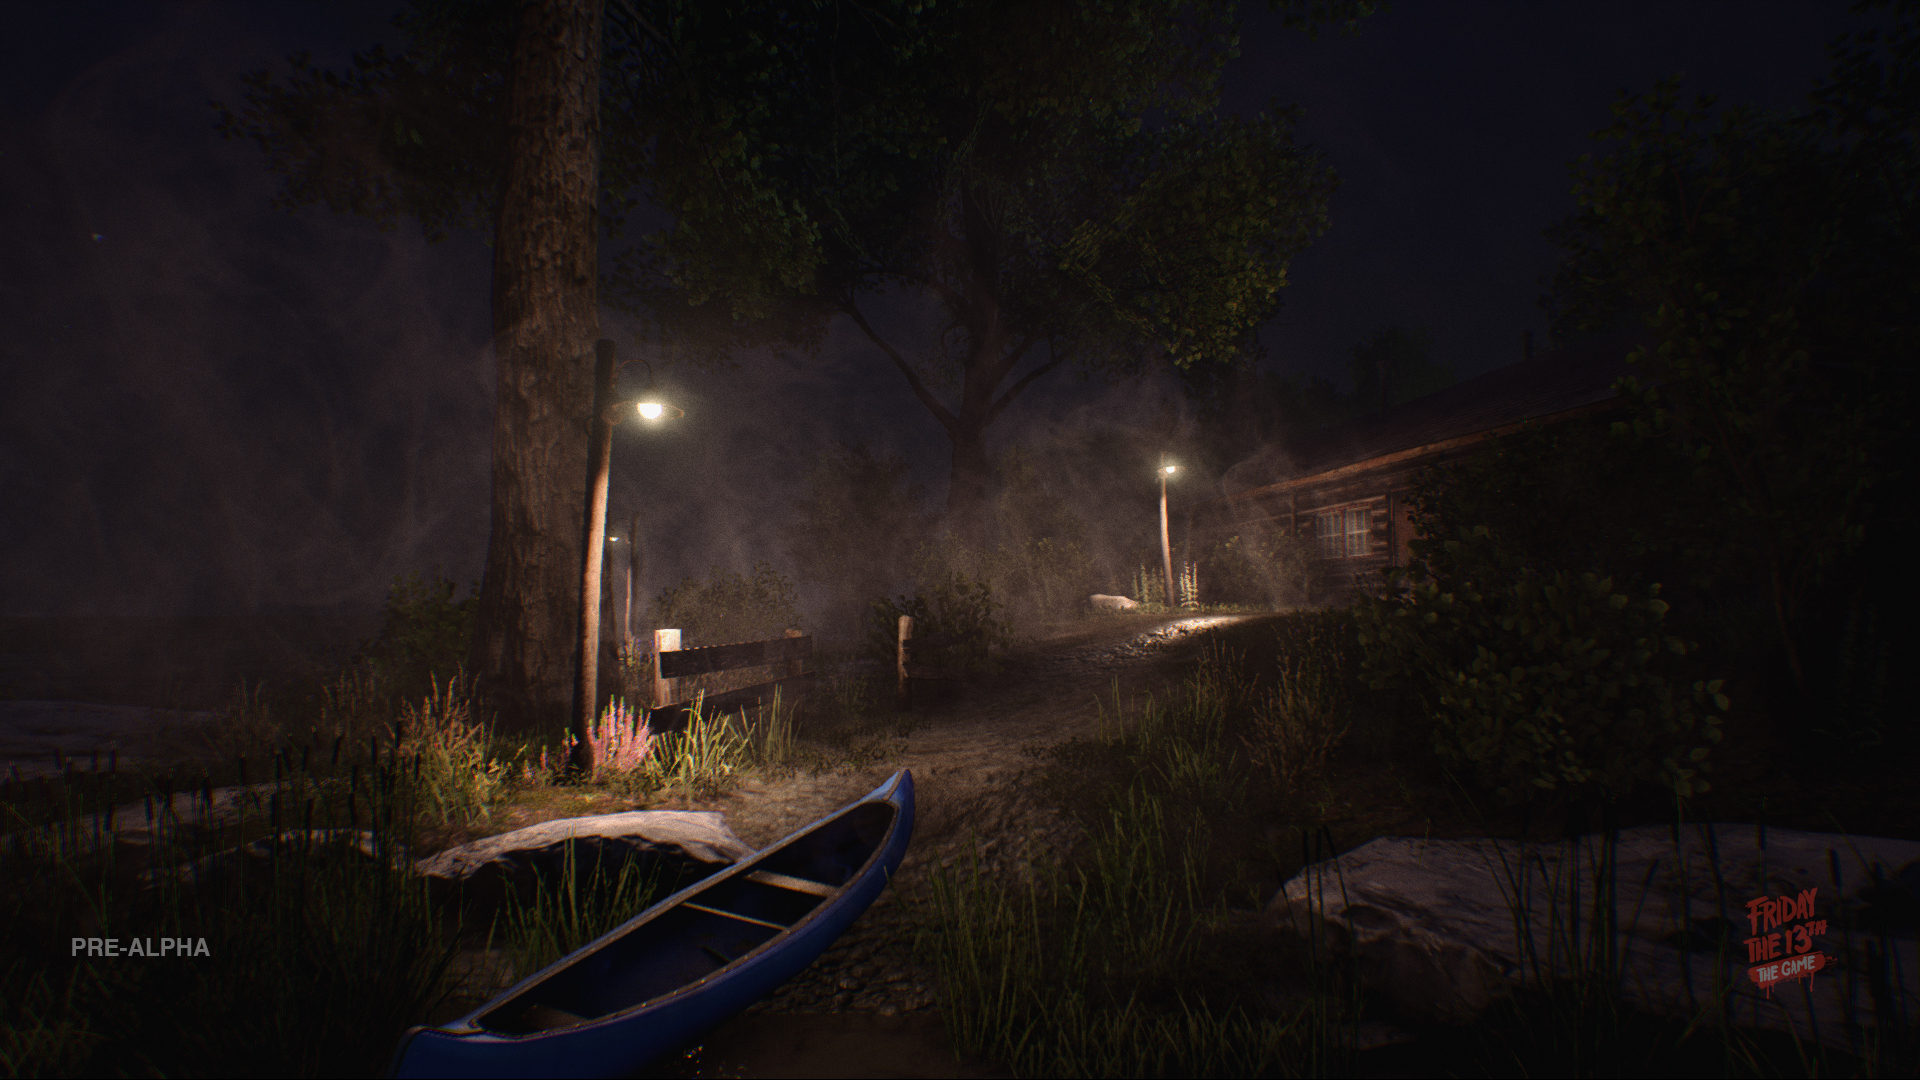 Friday The 13th: The Game #13